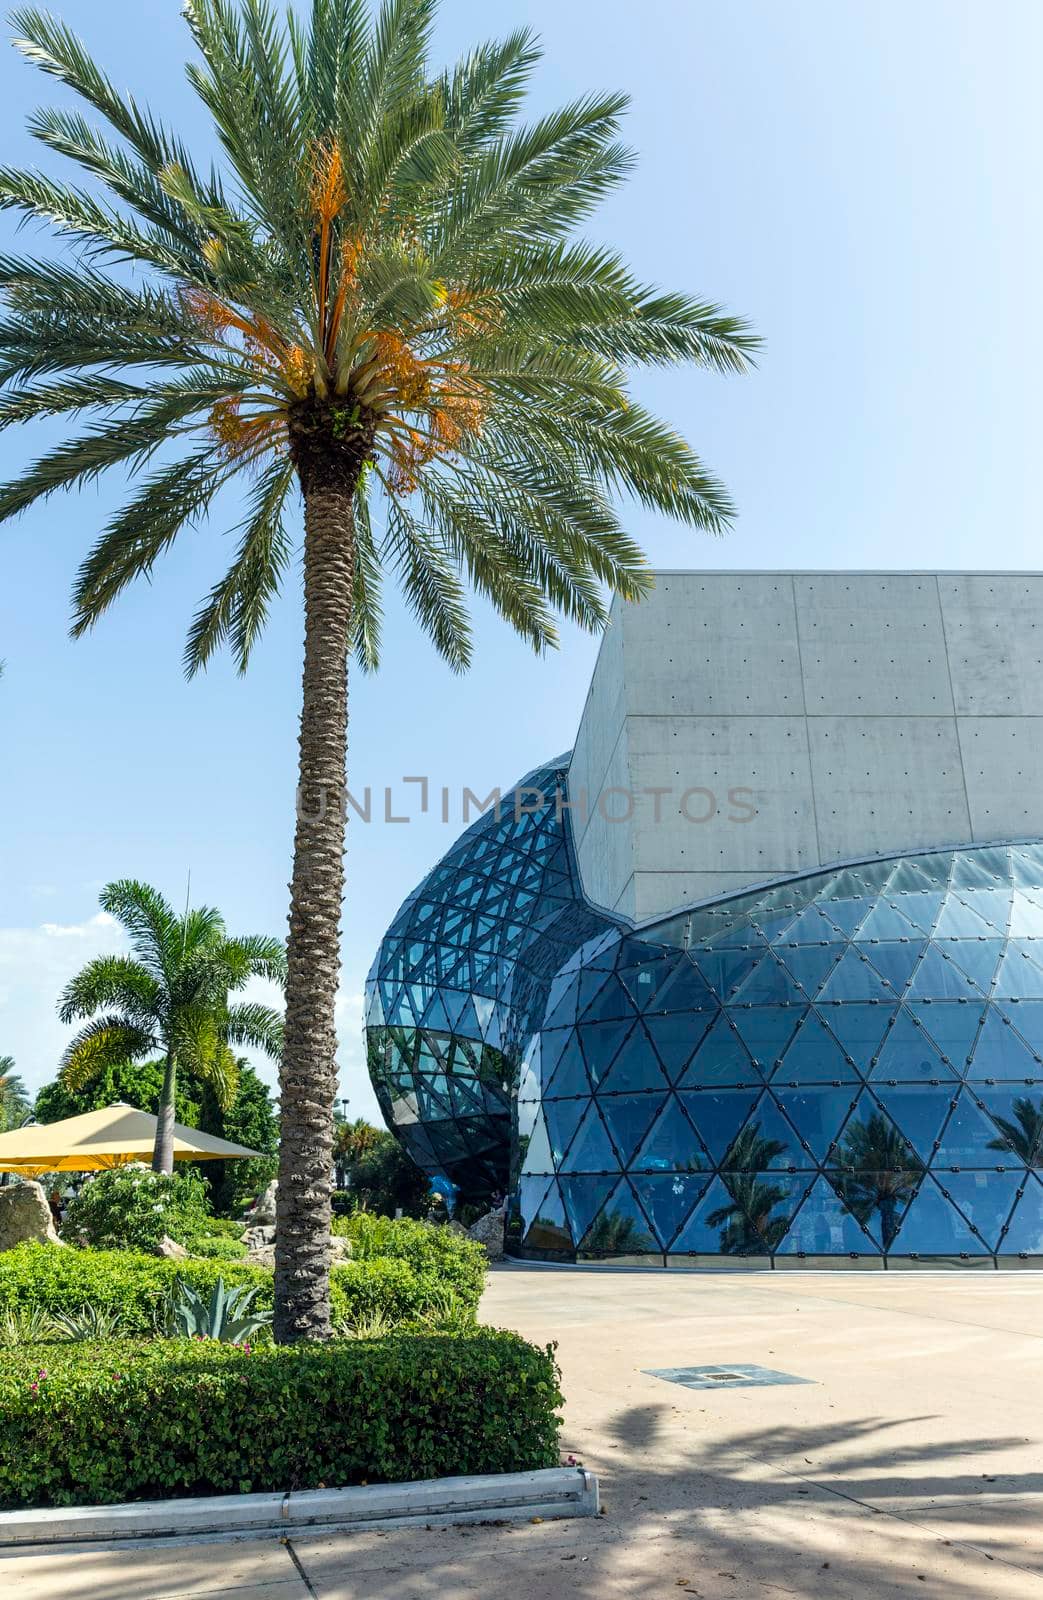 ST. PETERSBURG, FLORIDA - SEPTEMBER 2: Exterior of Salvador Dali Museum September 02, 2014 in St. Petersburg, FL. The museum has one of the largest collection of the works of Salvador Dali in the world. by Mariakray